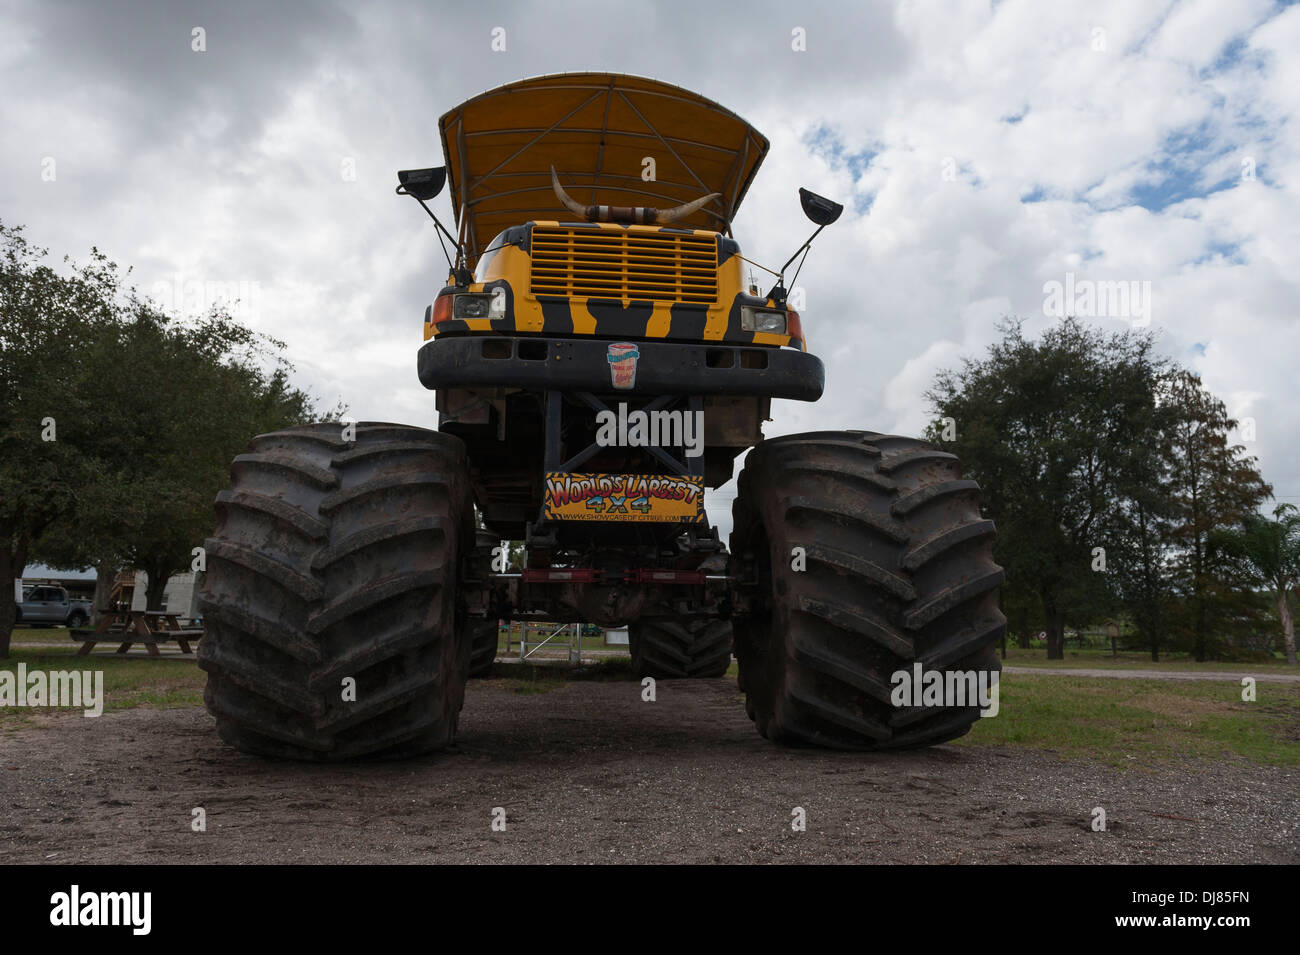 Worlds largest Monster Truck given Safari tours at the Showcase of Citrus  in Clermont, Florida USA Stock Photo - Alamy